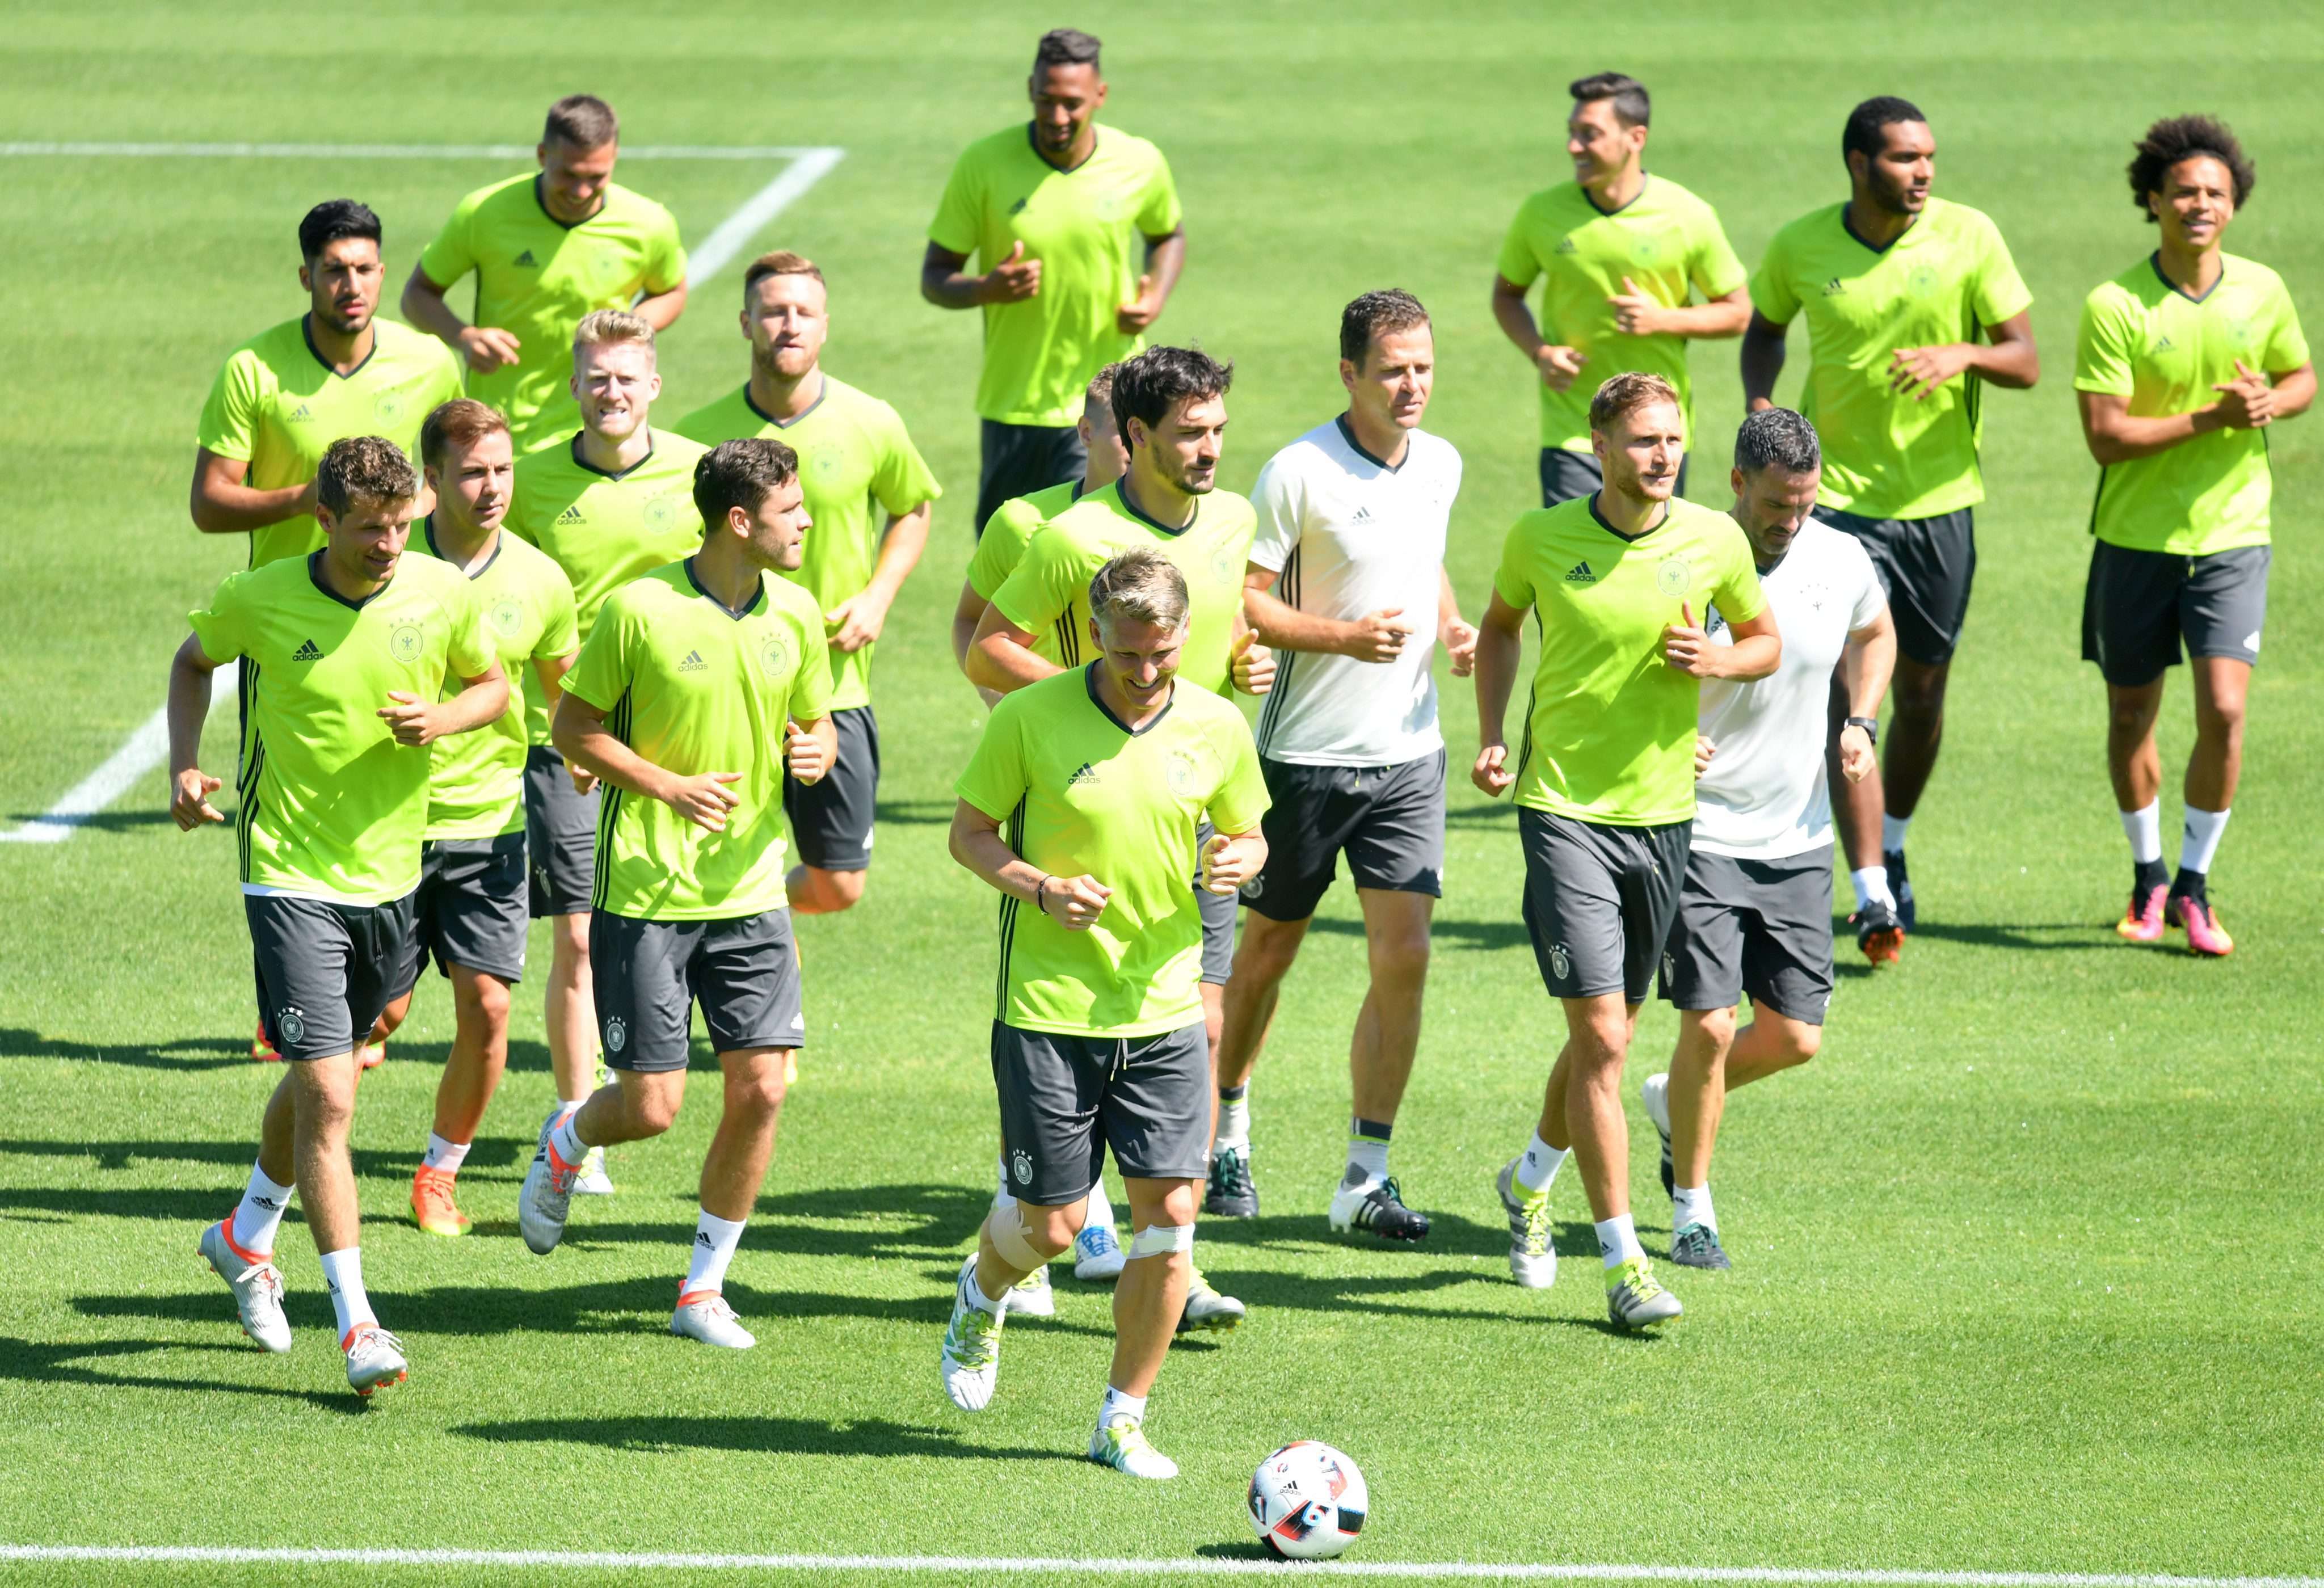 epa05410449 Germany's Bastian Schweinsteiger (foreground C) and team members during a training session of the German national soccer team in Evian, France, 06 July 2016. Germany will face France in a semi final of the UEFA EURO 2016 in Marseille on 07 July. EPA/ARNE DEDERT